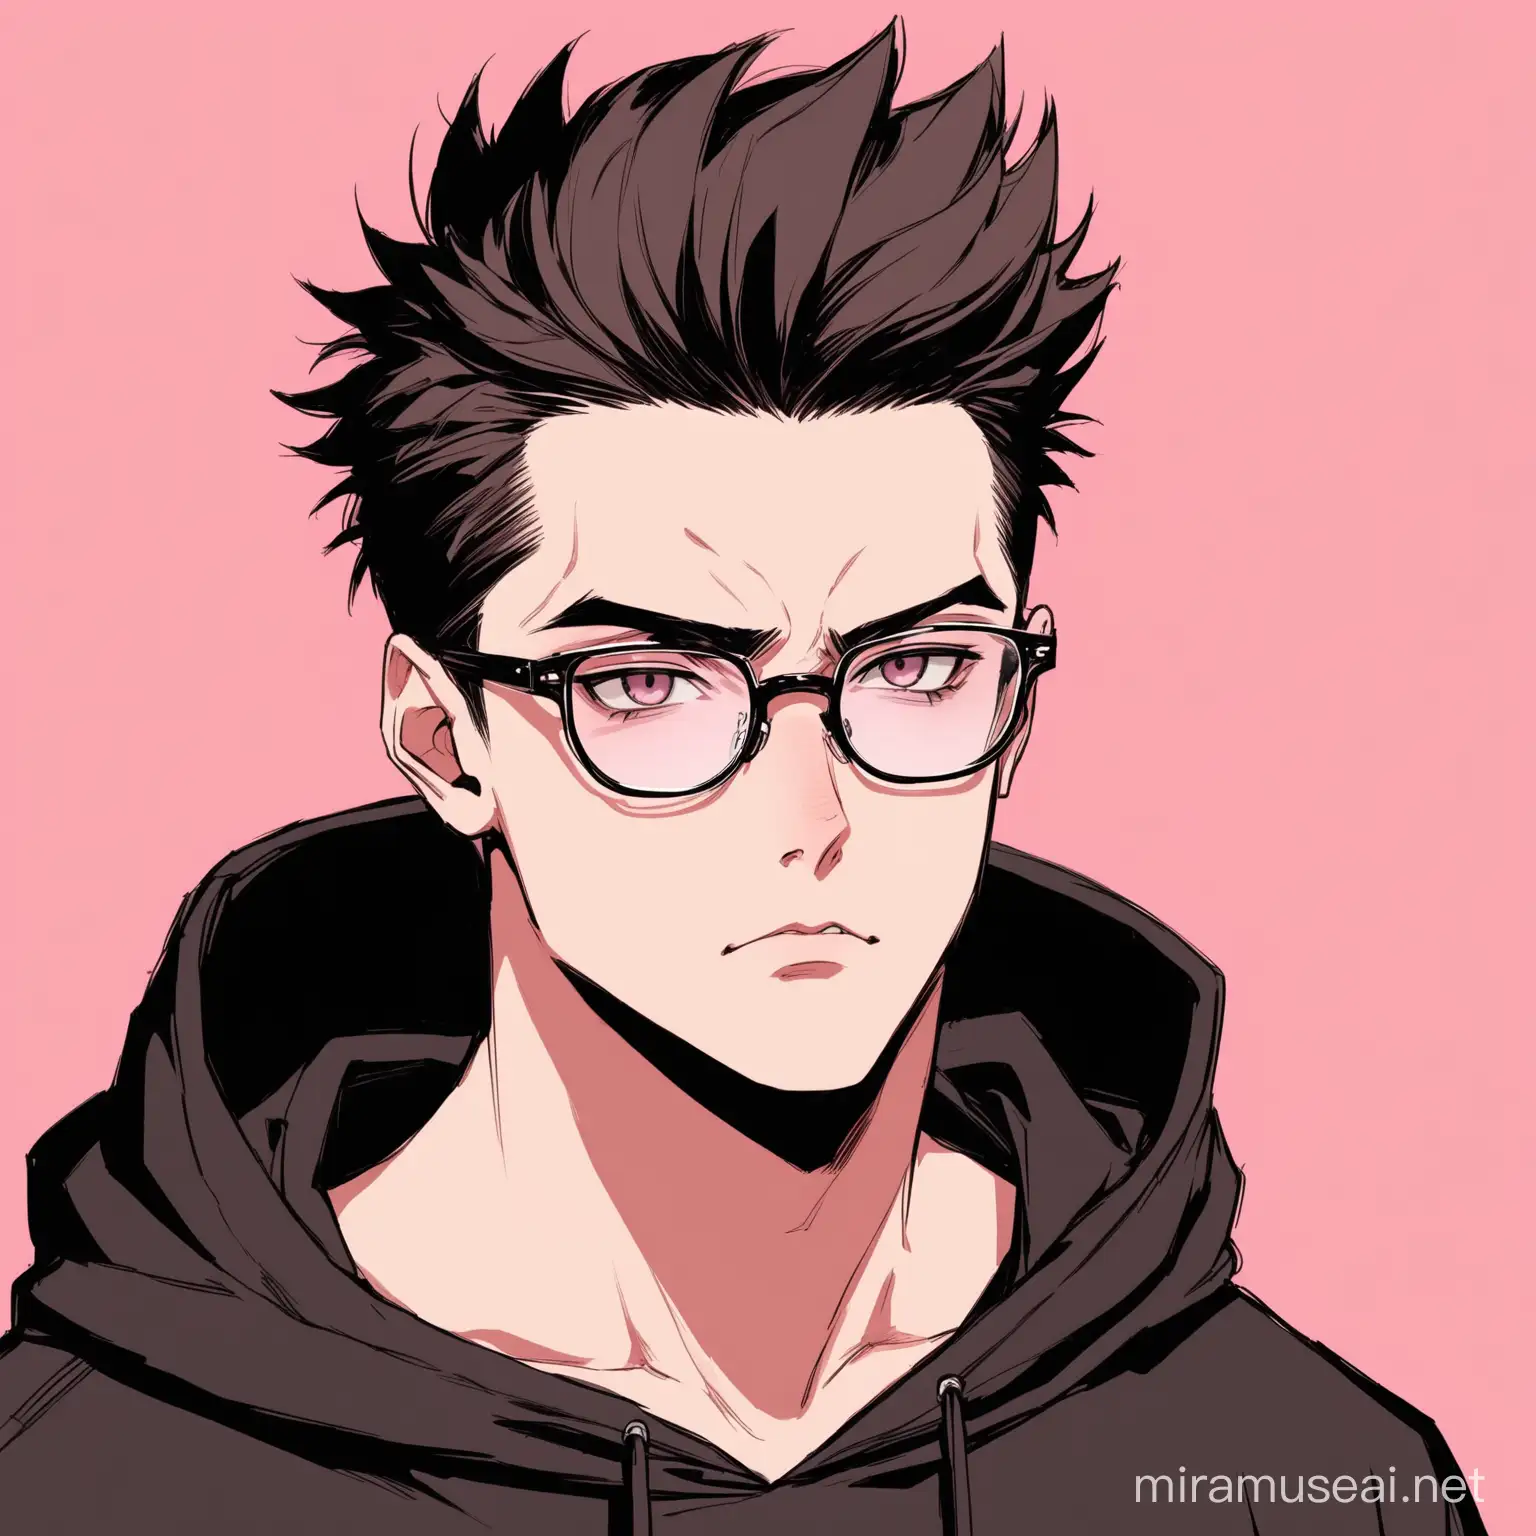 Stylish Hacker with Quiff Hair and Black Hoodie on Pink Aesthetic Background